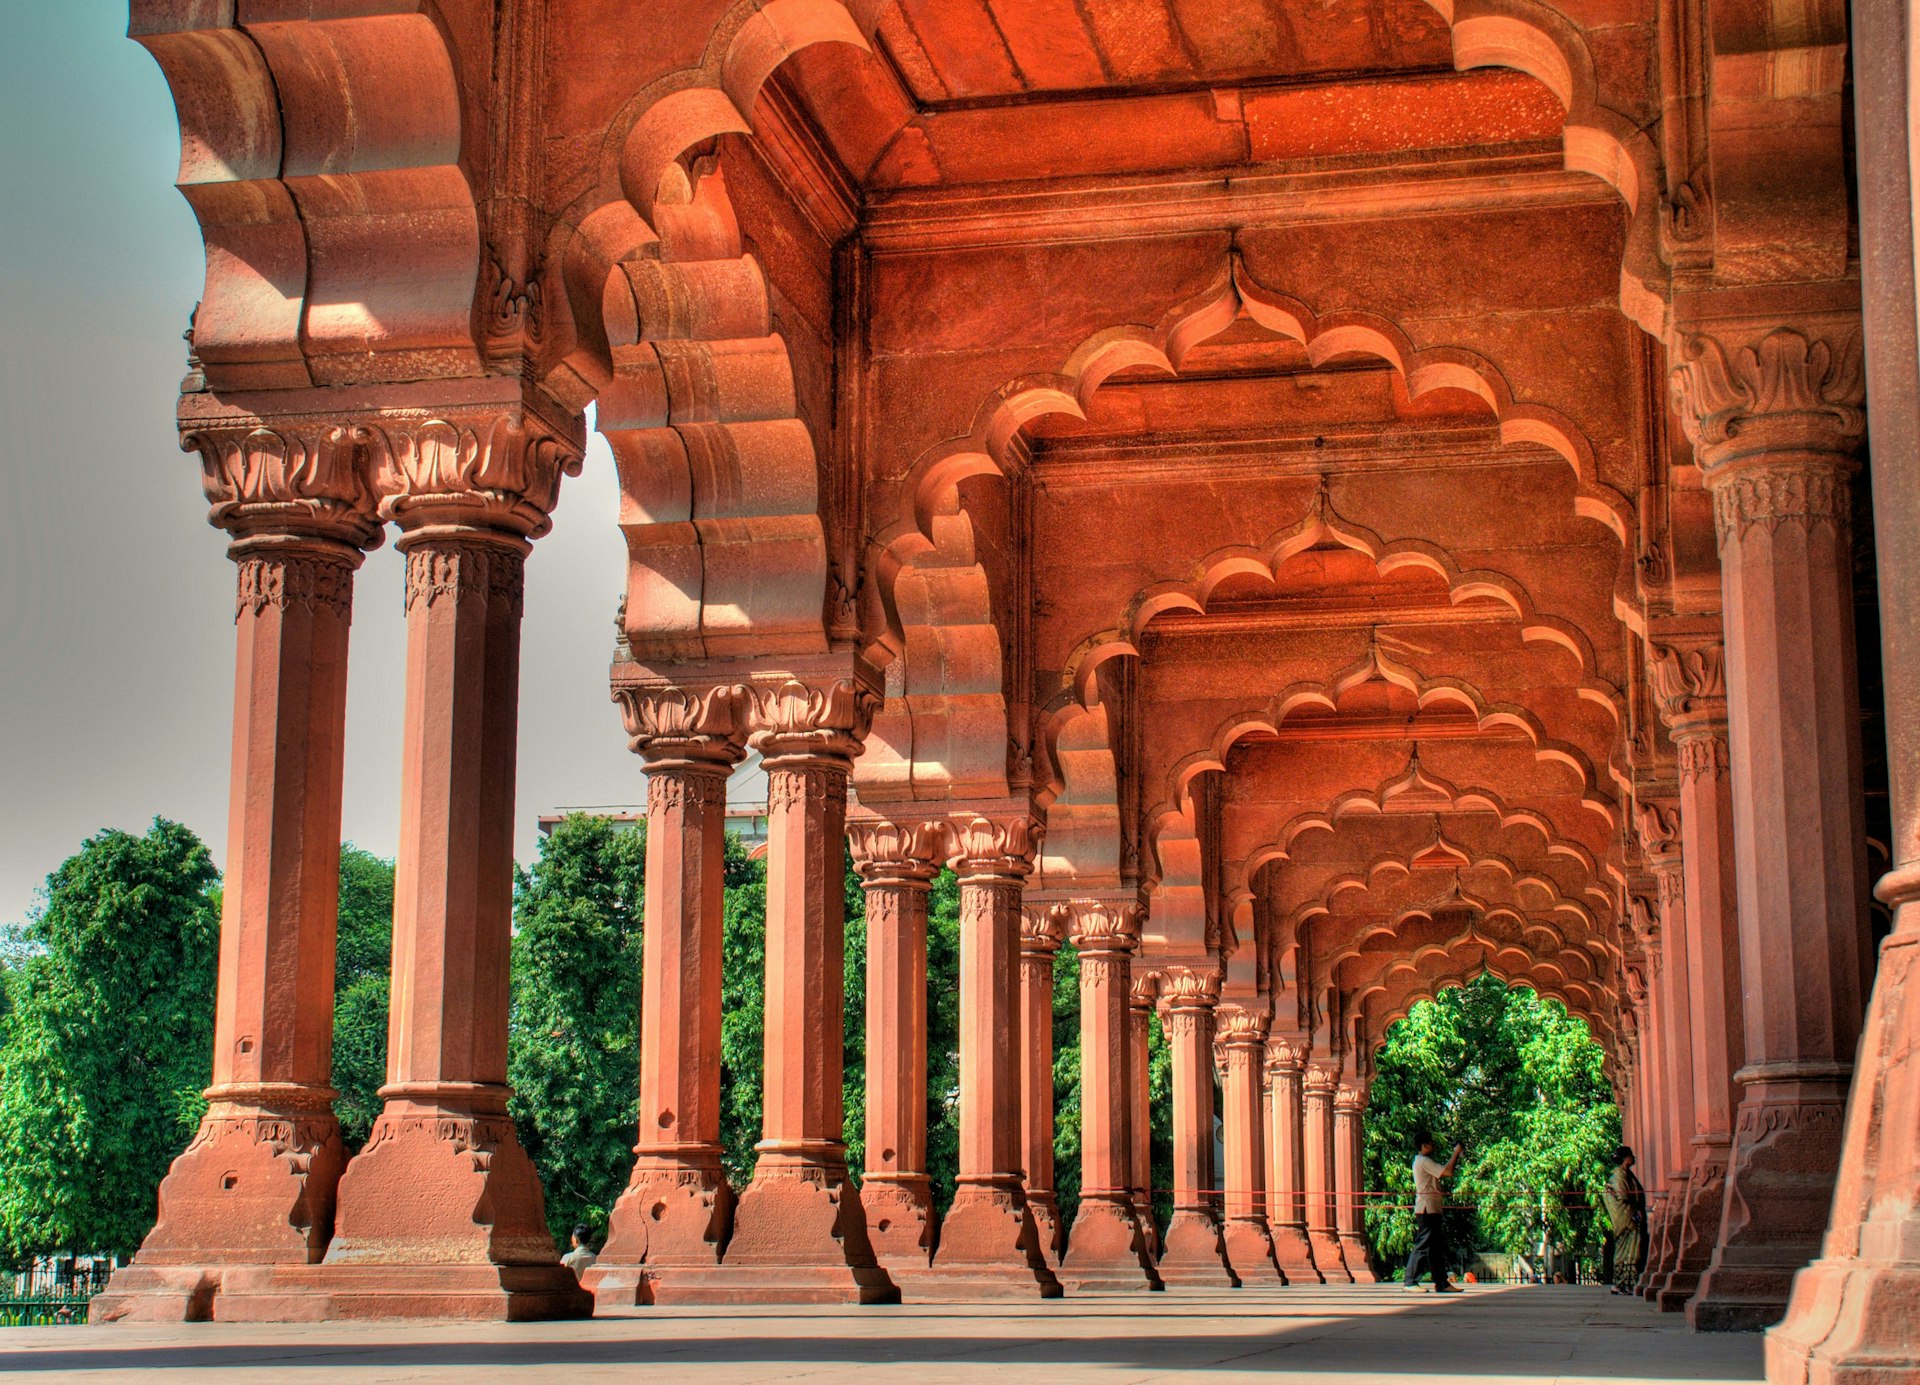 Red sandstone arches at Delhi's Red Fort